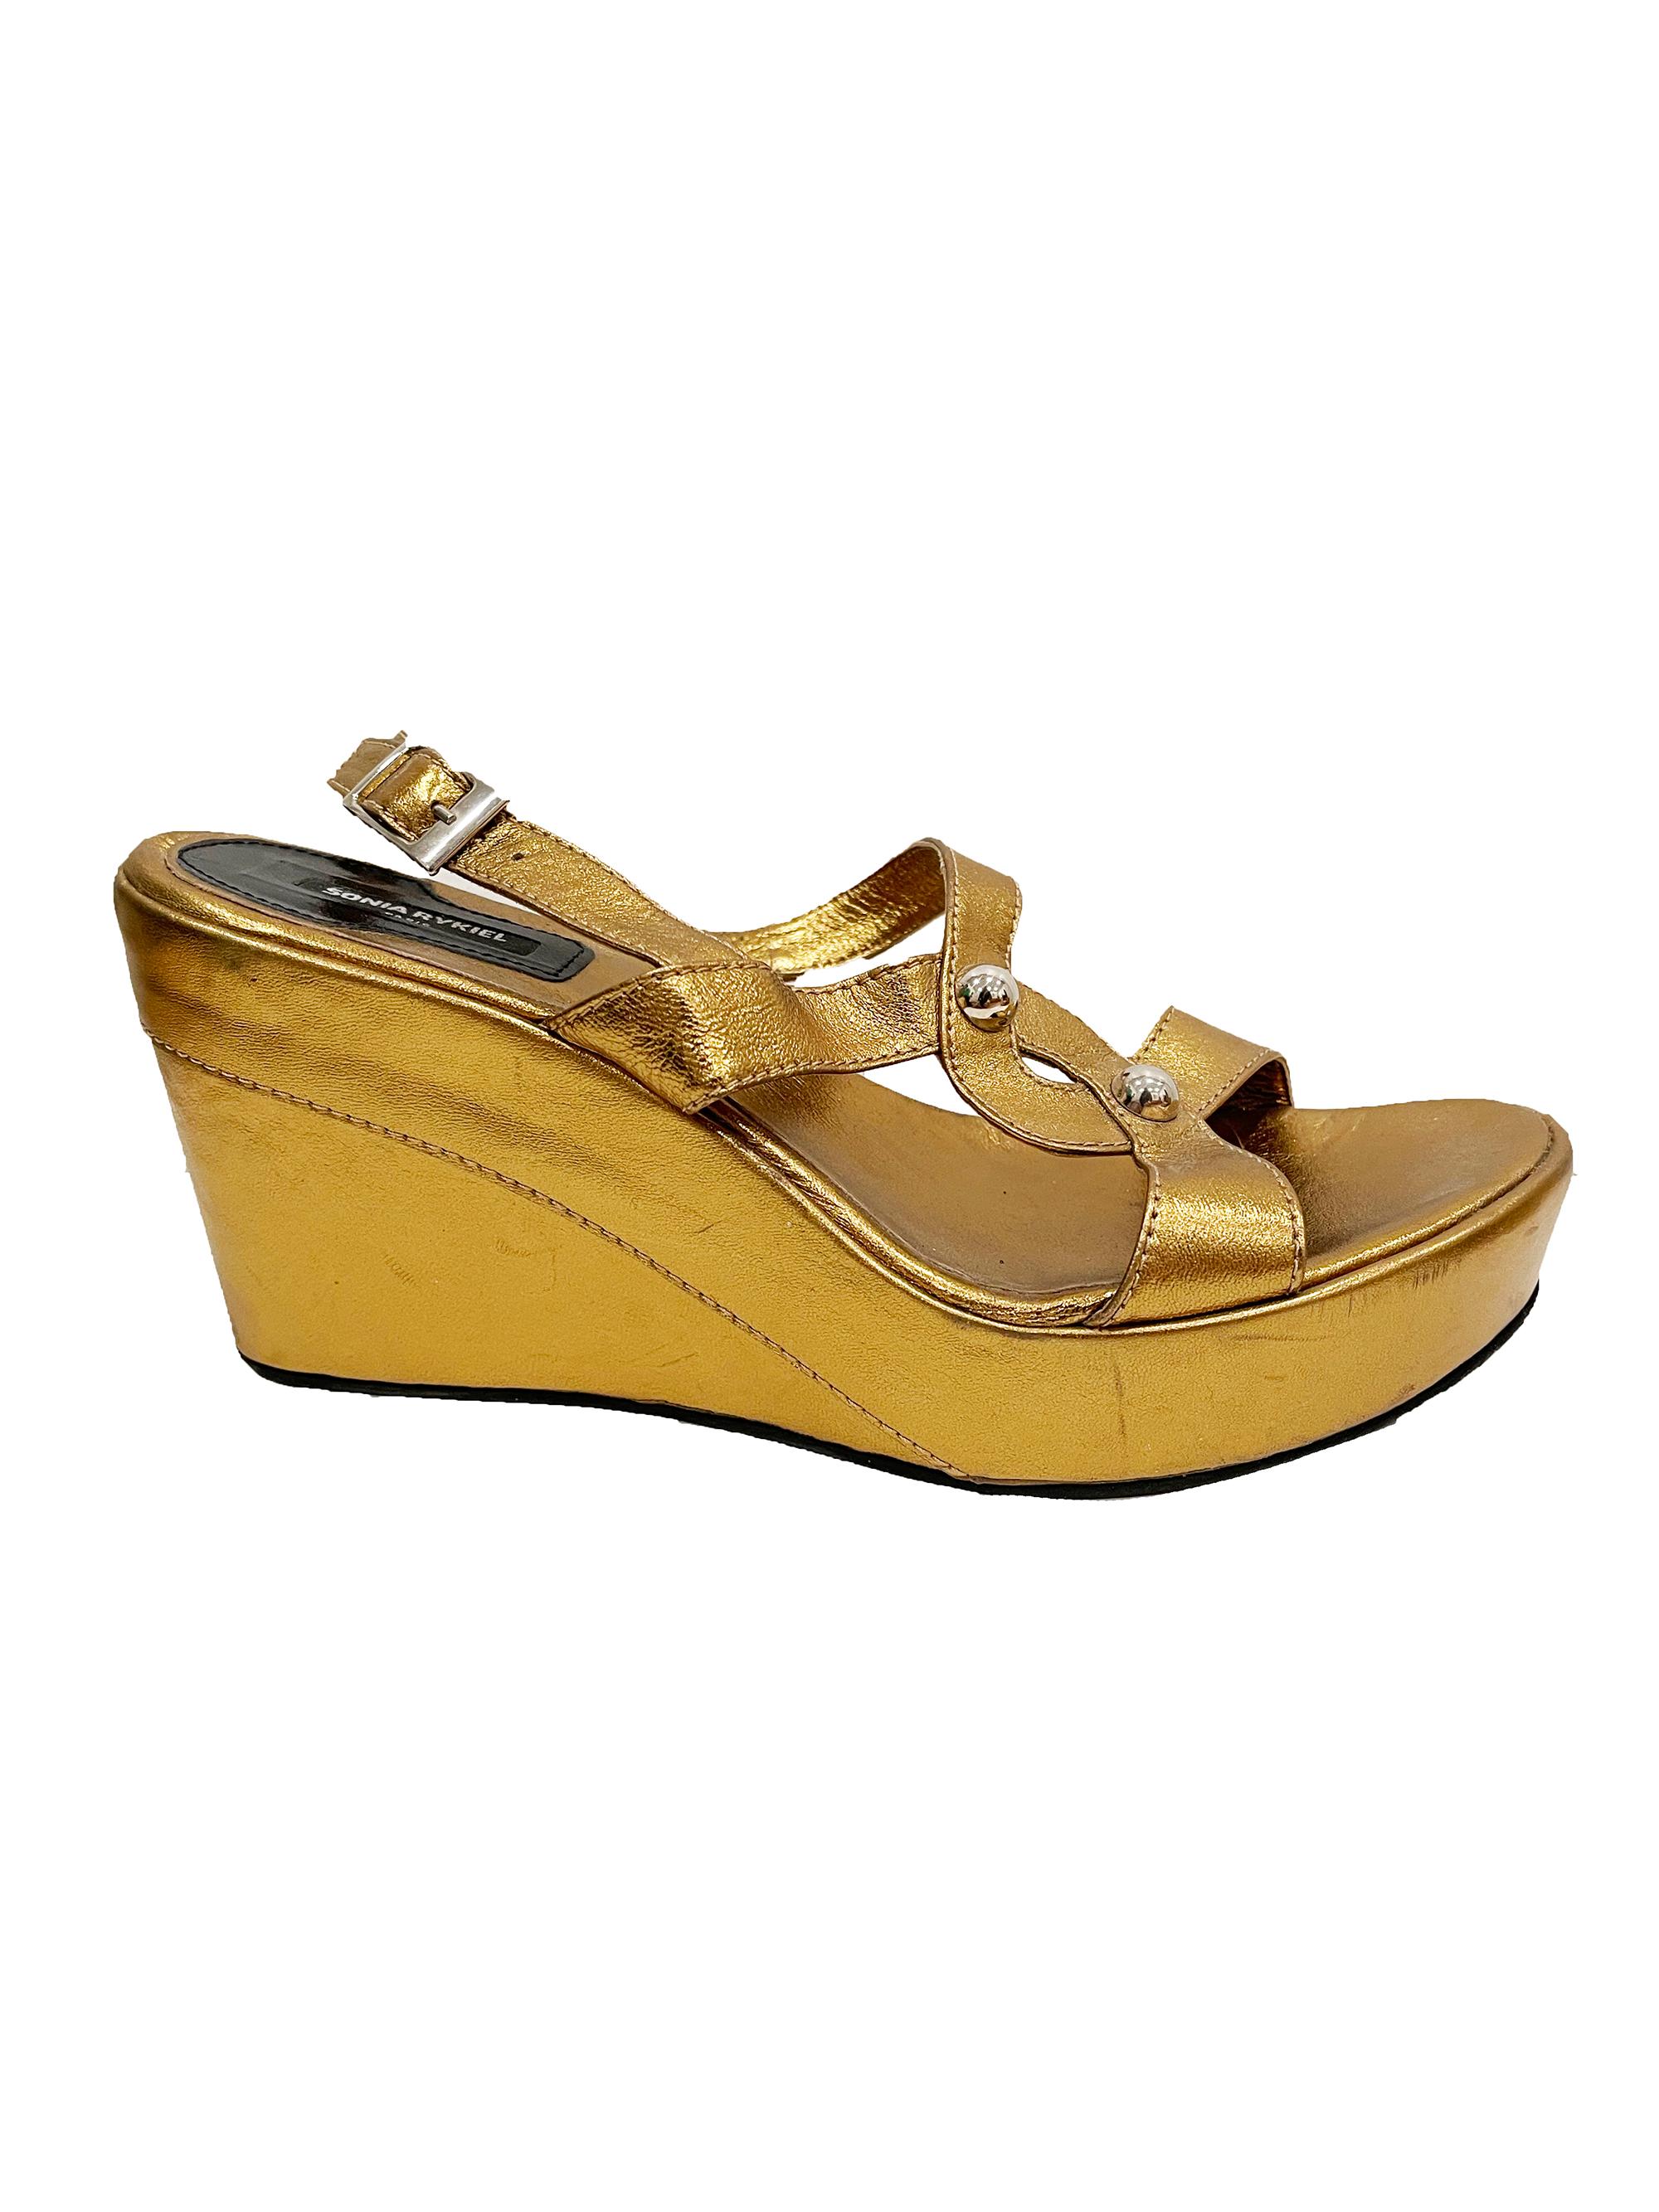 1990s Sonia Rykiel Gold Wedge Sandals For Sale at 1stDibs